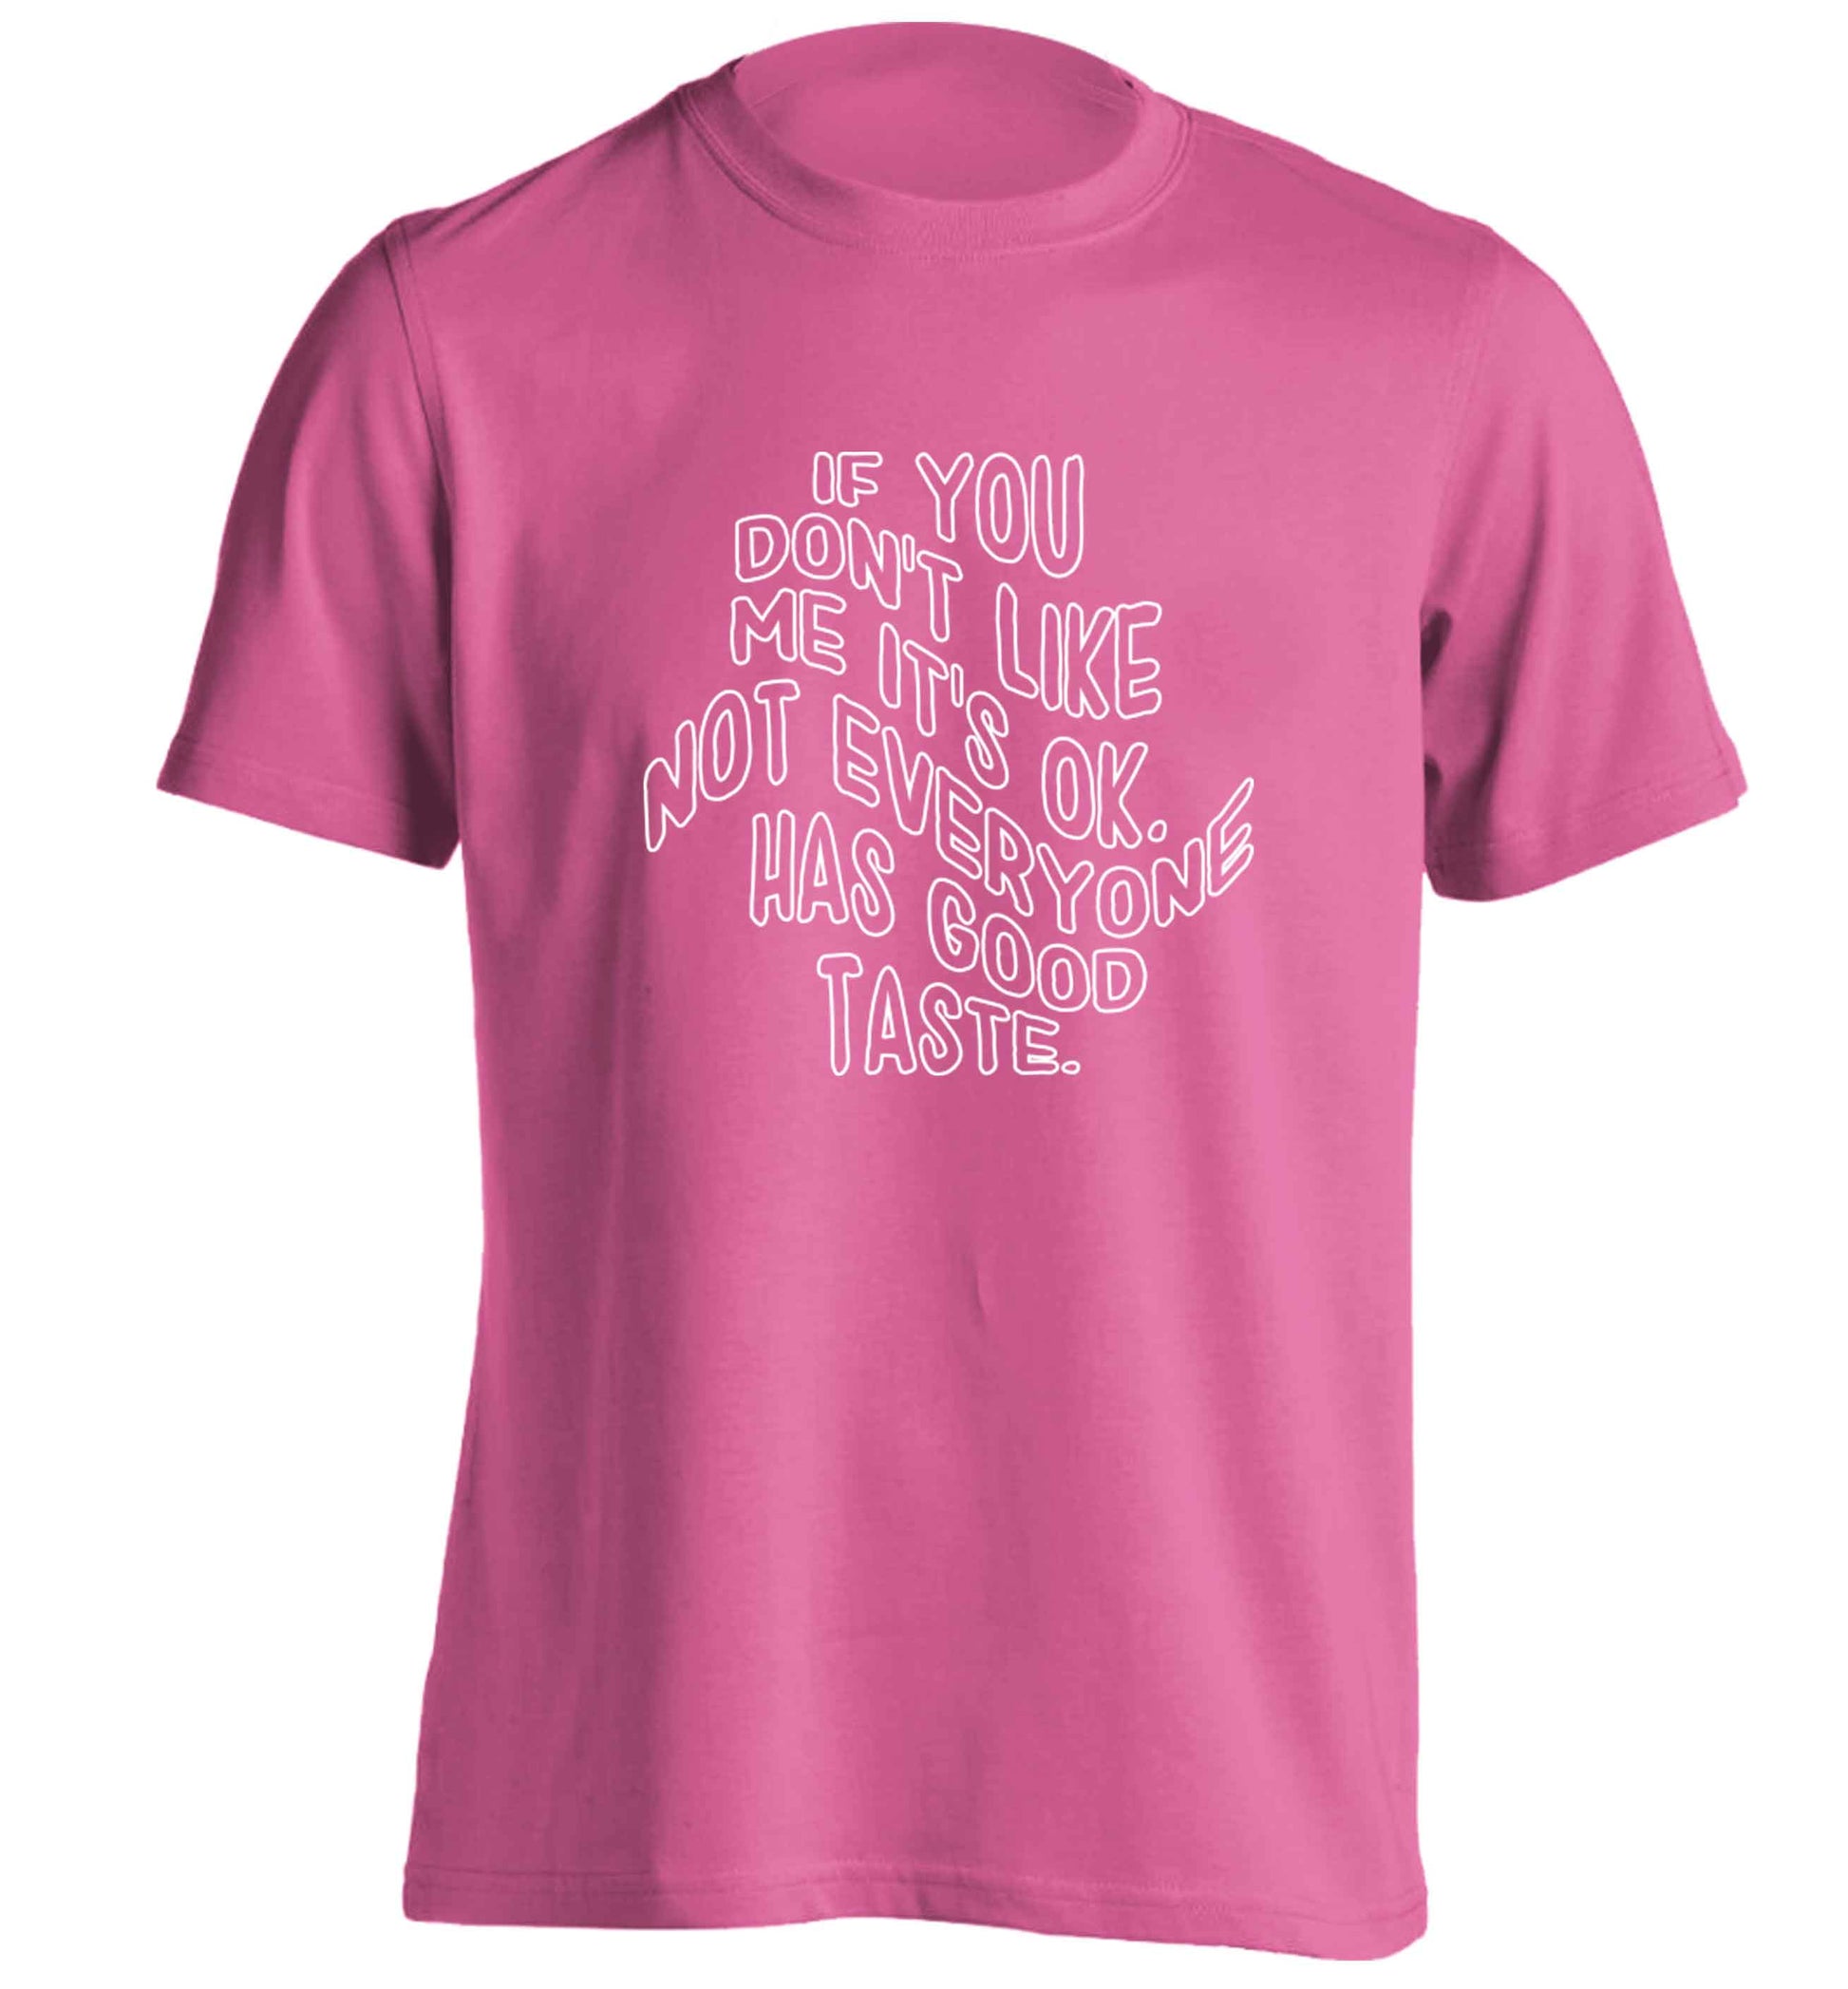 If you don't like me it's ok not everyone has good taste adults unisex pink Tshirt 2XL